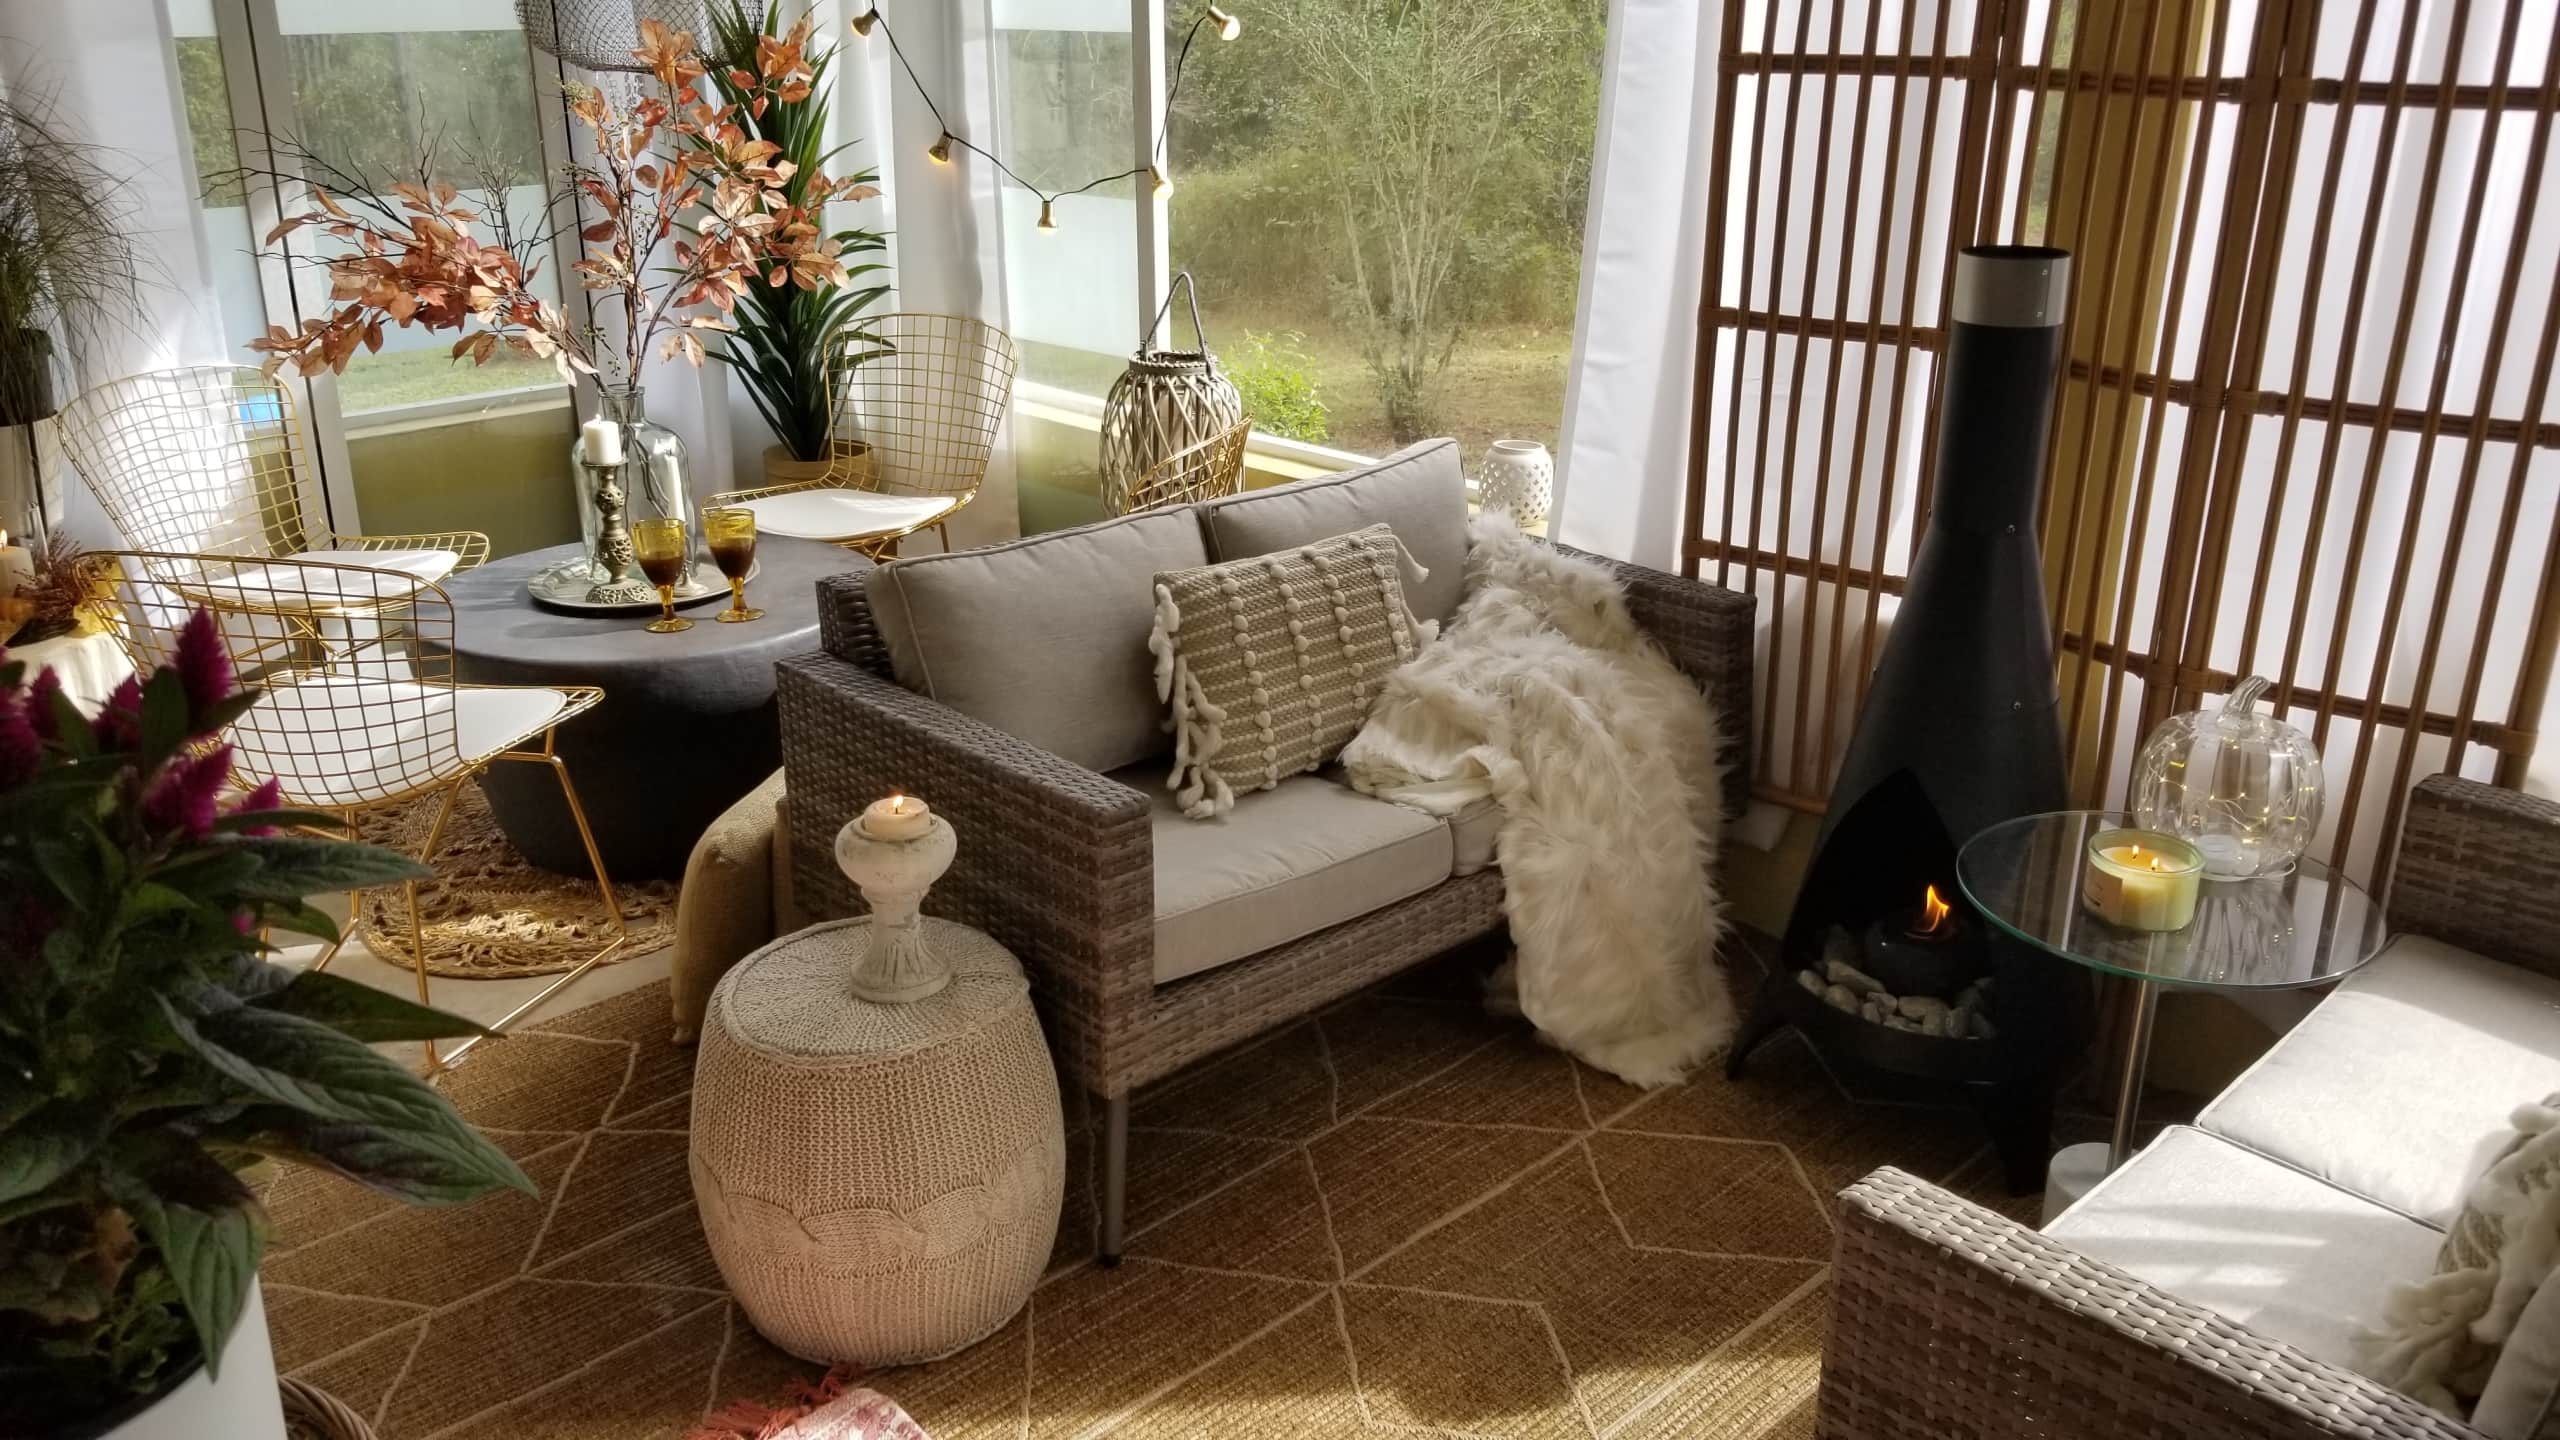 Fall Decor Back Porch Smores Cozy Lantern Candles Curtains Firepit Bee and Willow Pumpkin Autumn Decorating Mid Century Modern Hygge Scandinavian Rustic Farmhouse Country Living Home Garden Bed Bath & Beyond Amber Glass Love seat